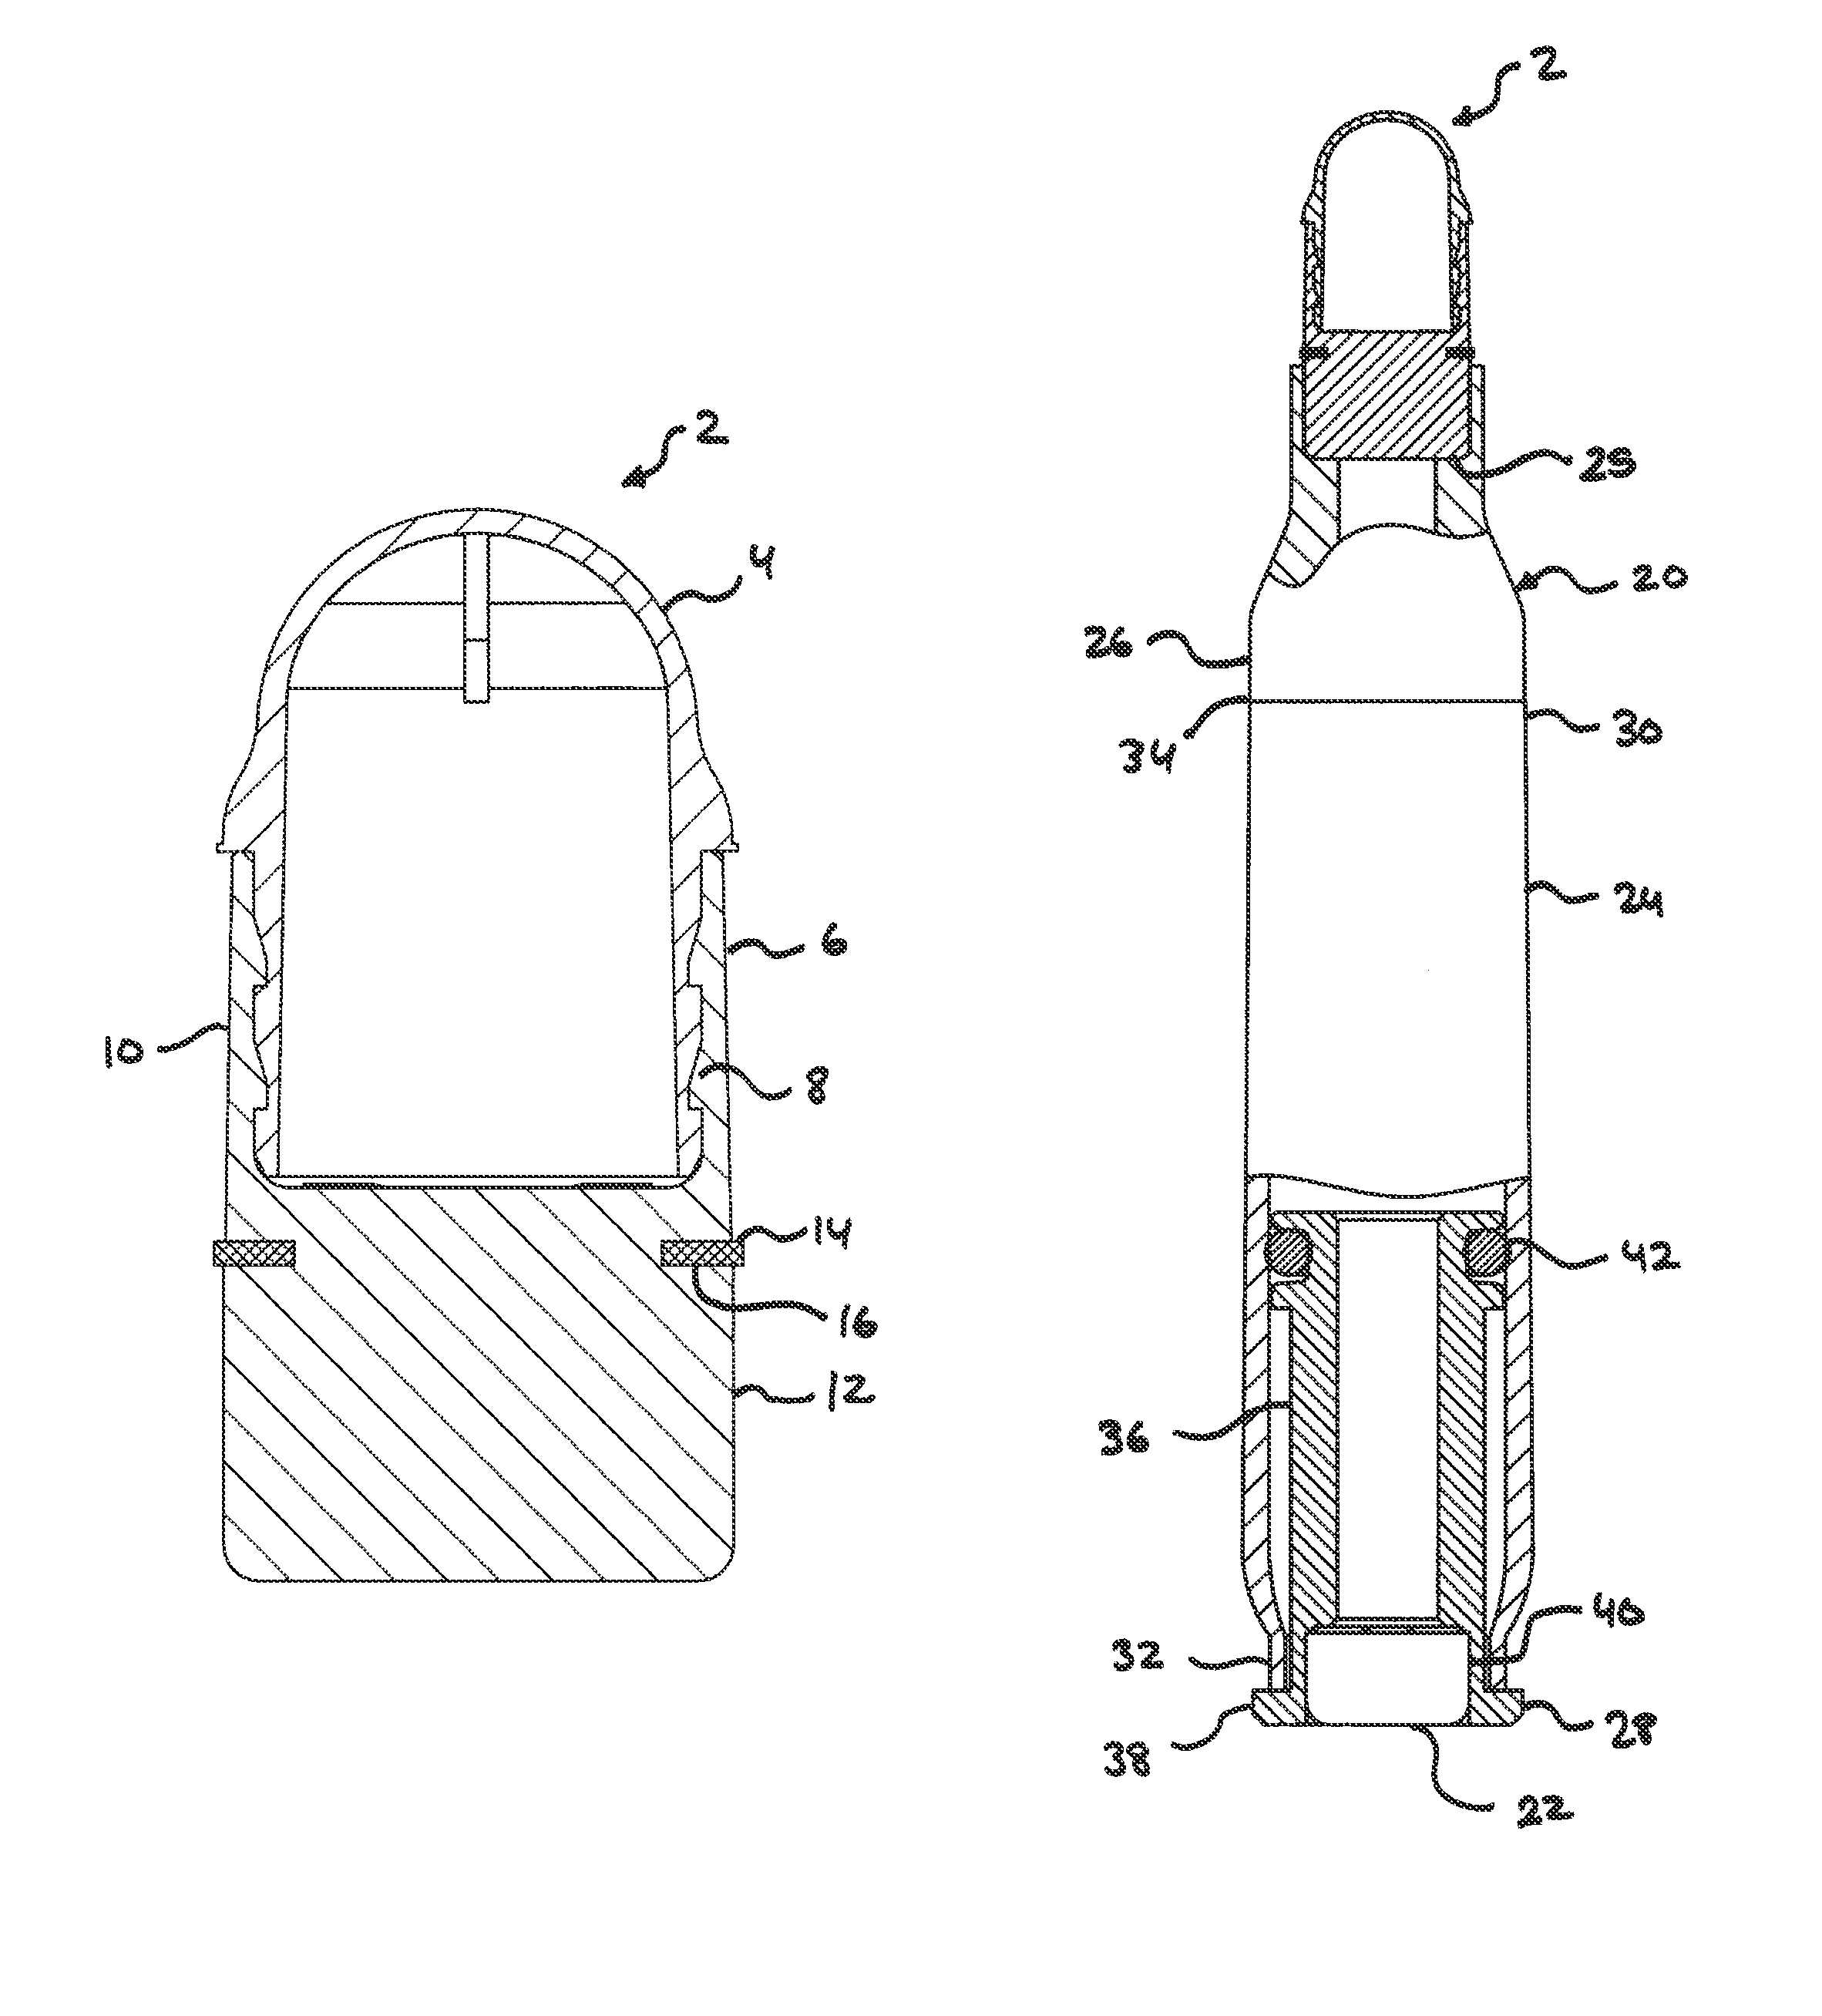 Spin-stabilized non-lethal projectile with a shear-thinning fluid